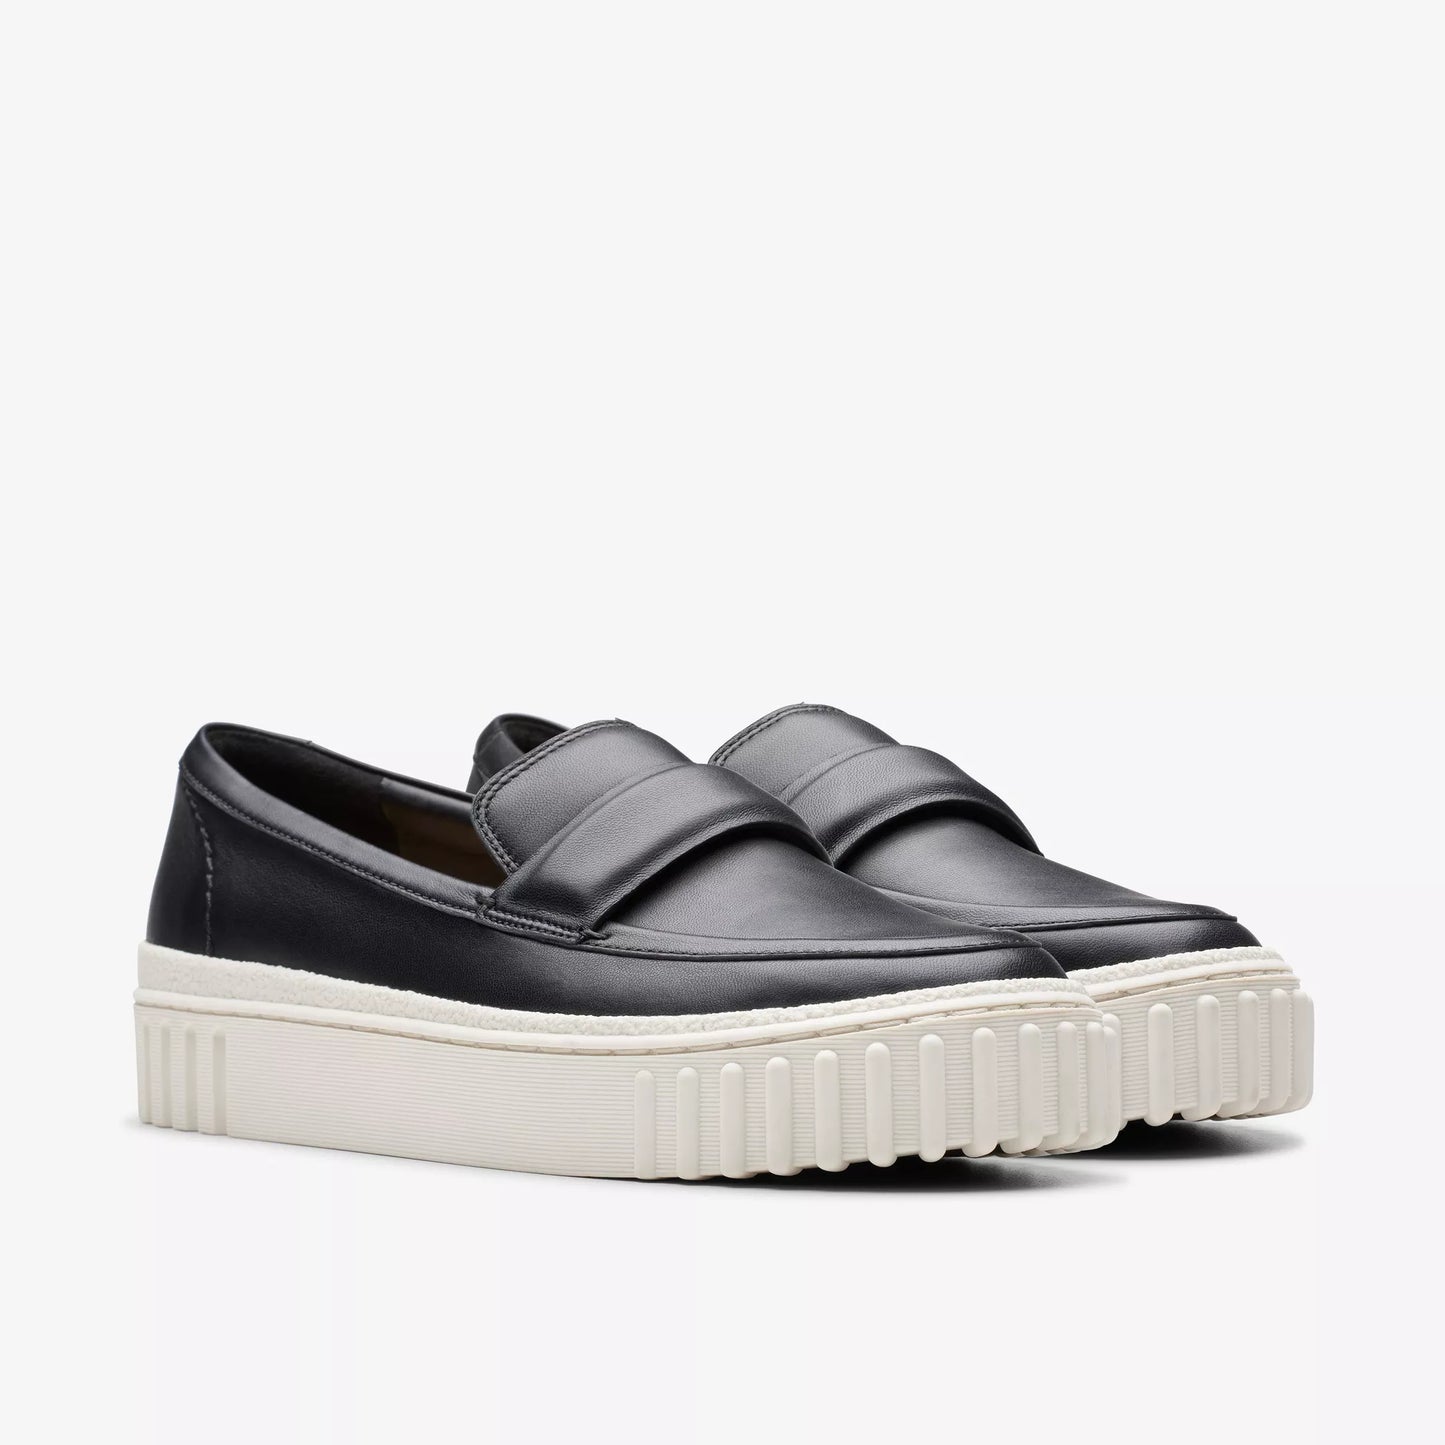 the black leather Mayhill Cove Loafer by Clarks